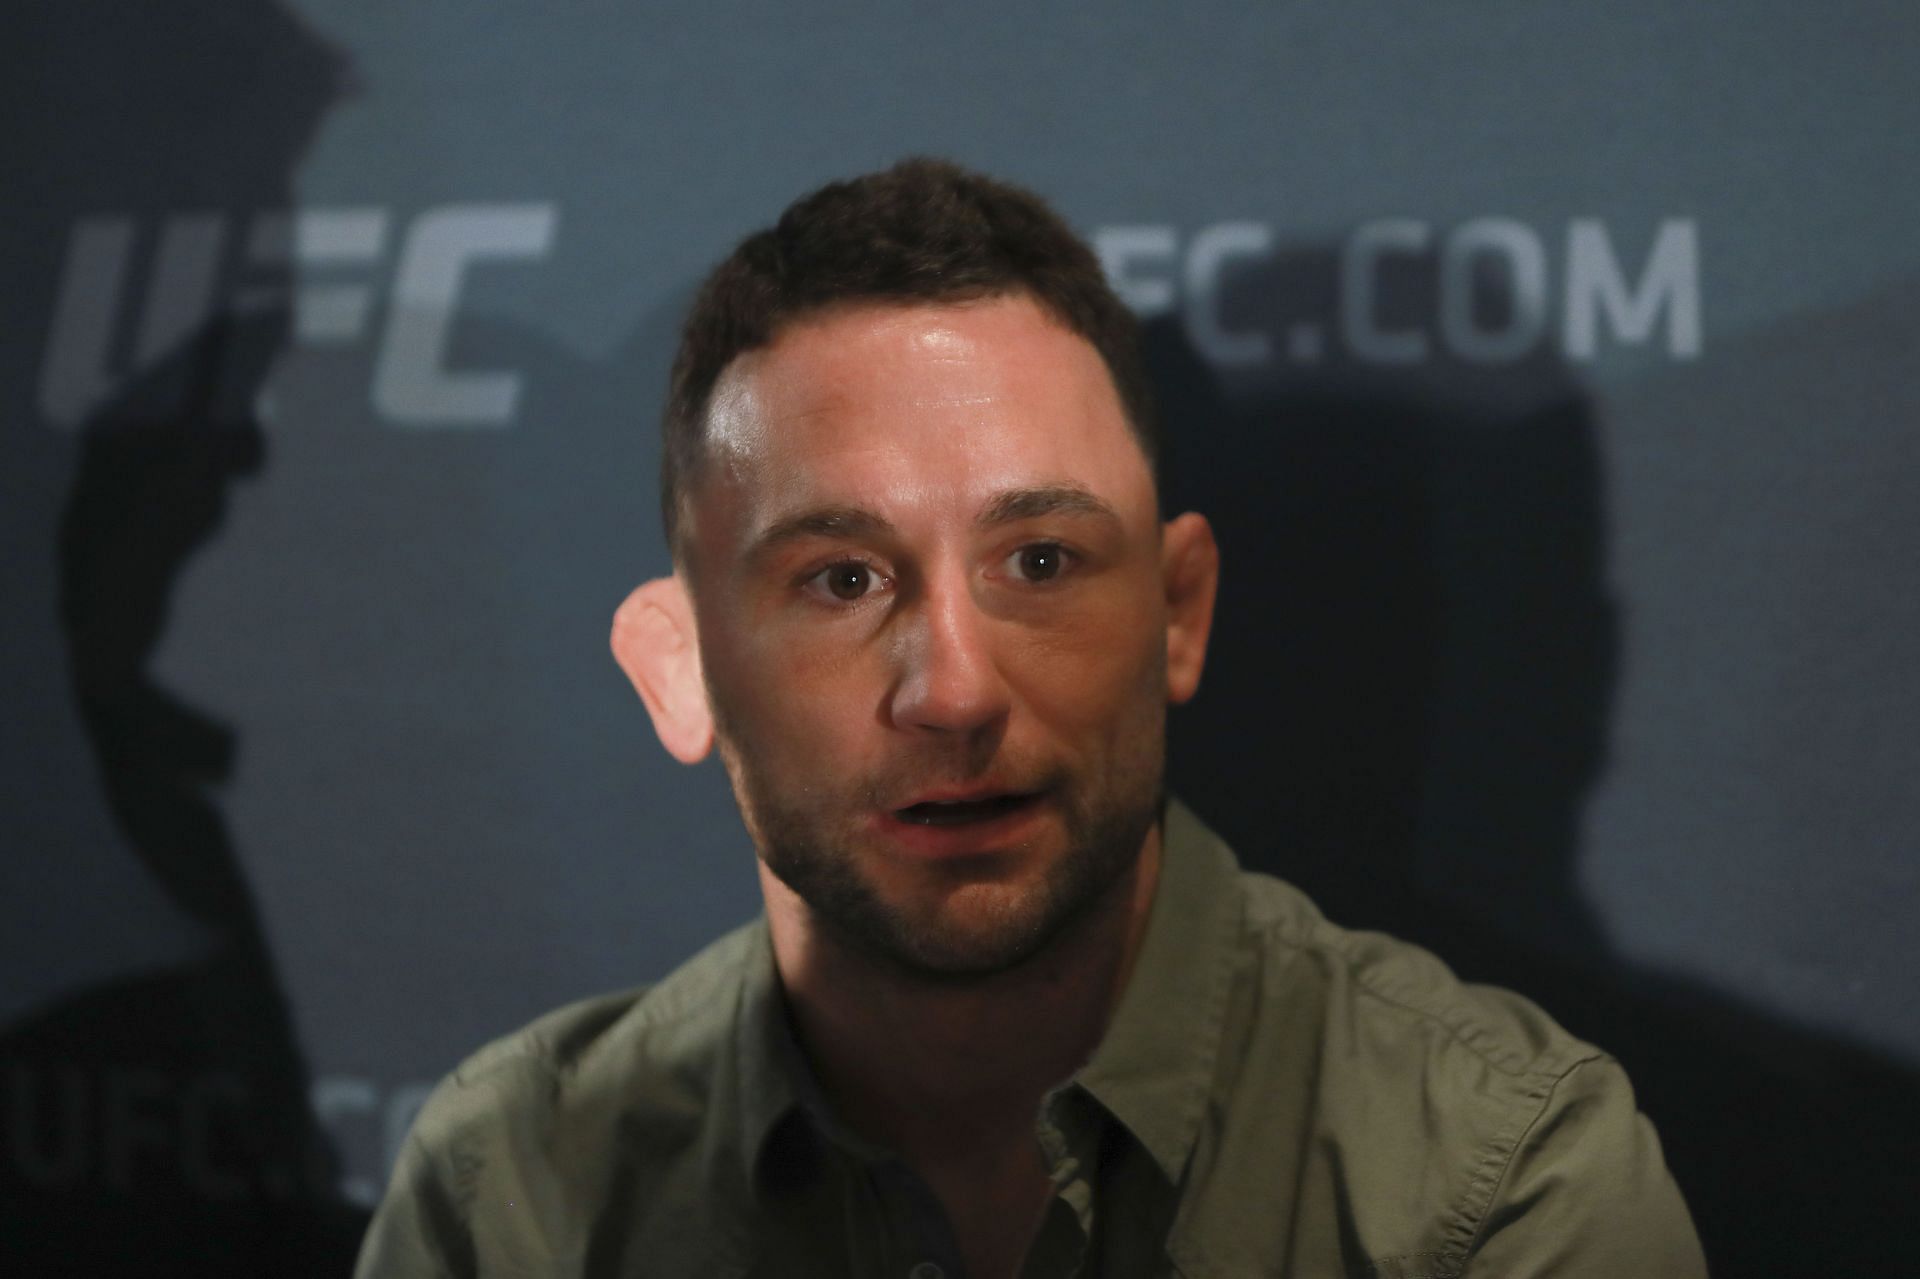 Frankie Edgar might be past his prime, but he could be an excellent opponent for Adrian Yanez